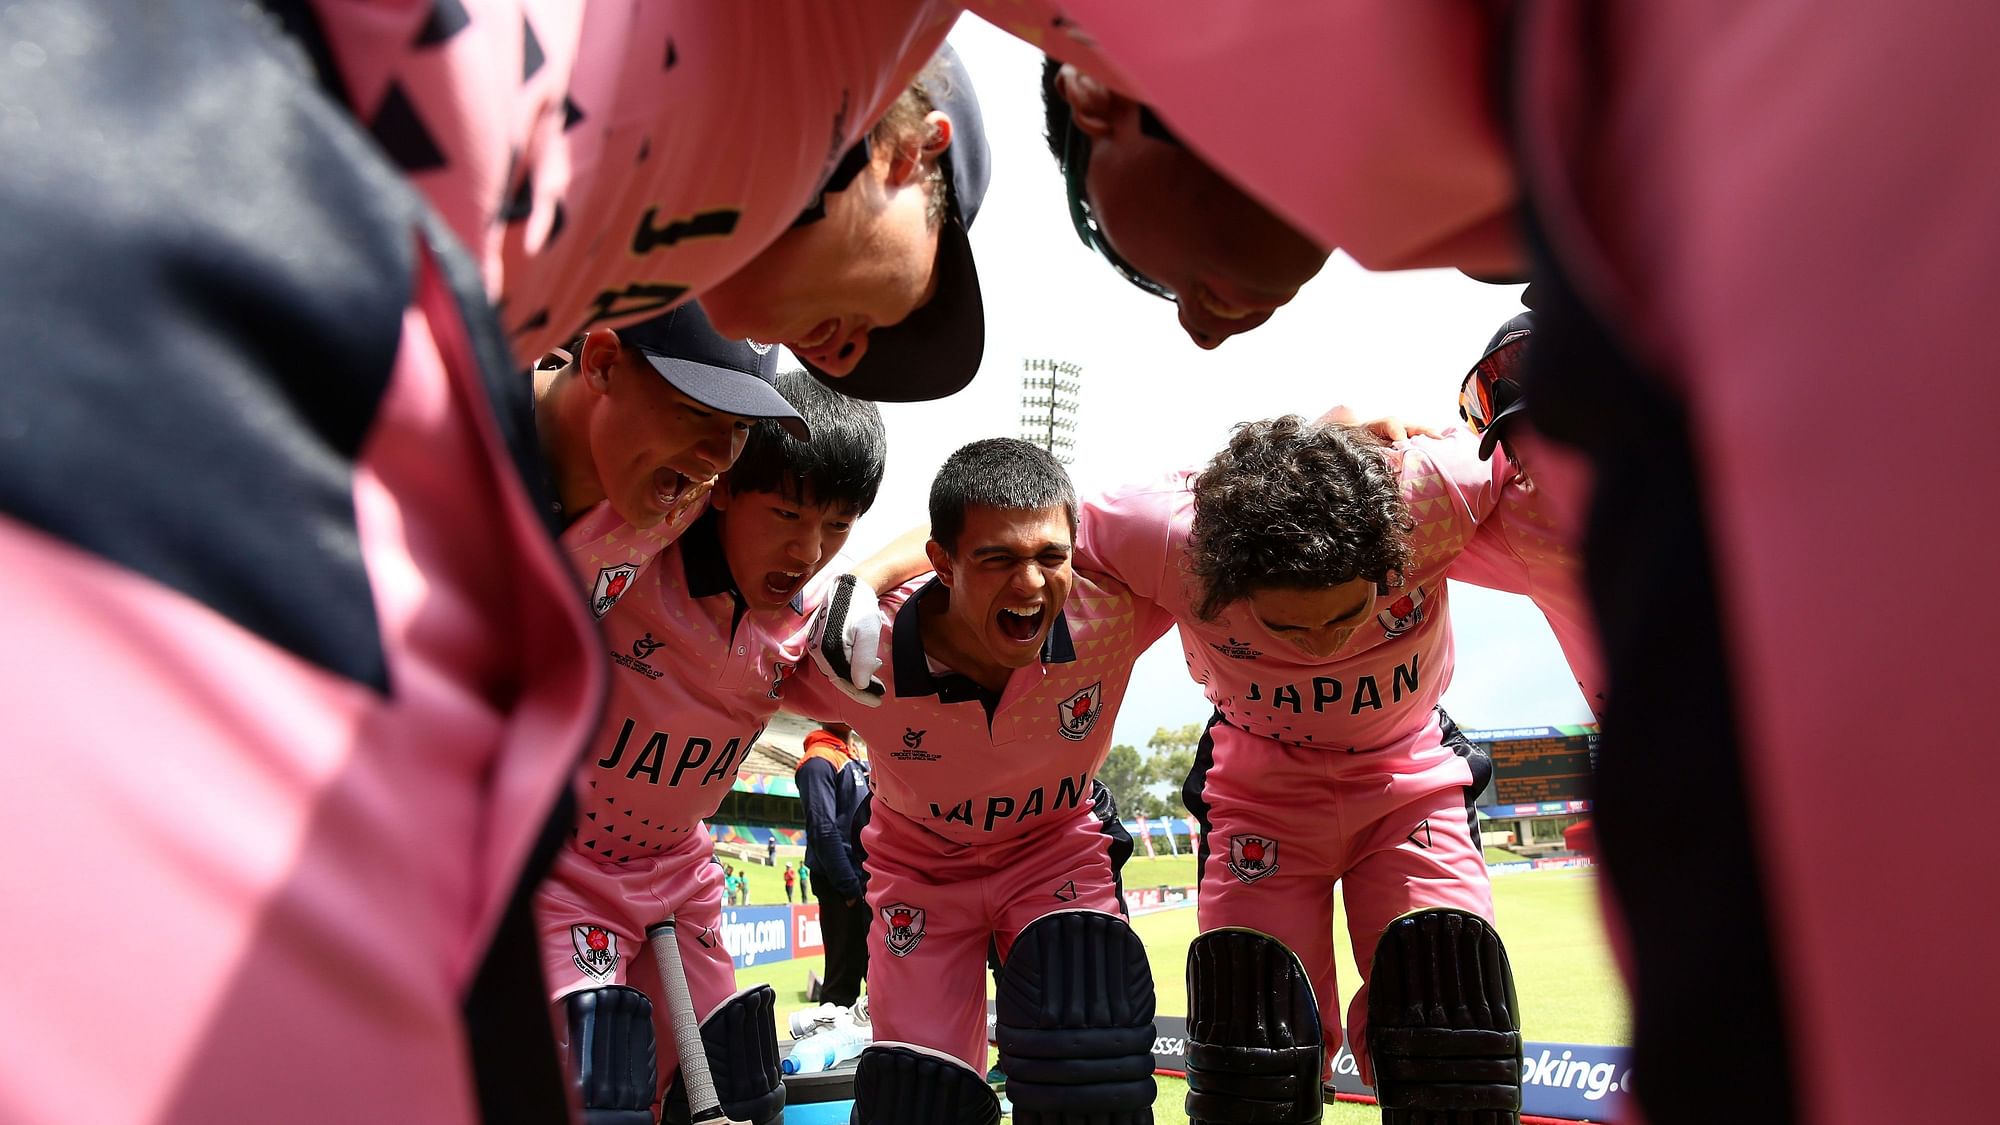 A strange incident off the field changed the fortunes of the Japanese cricket team on the field.